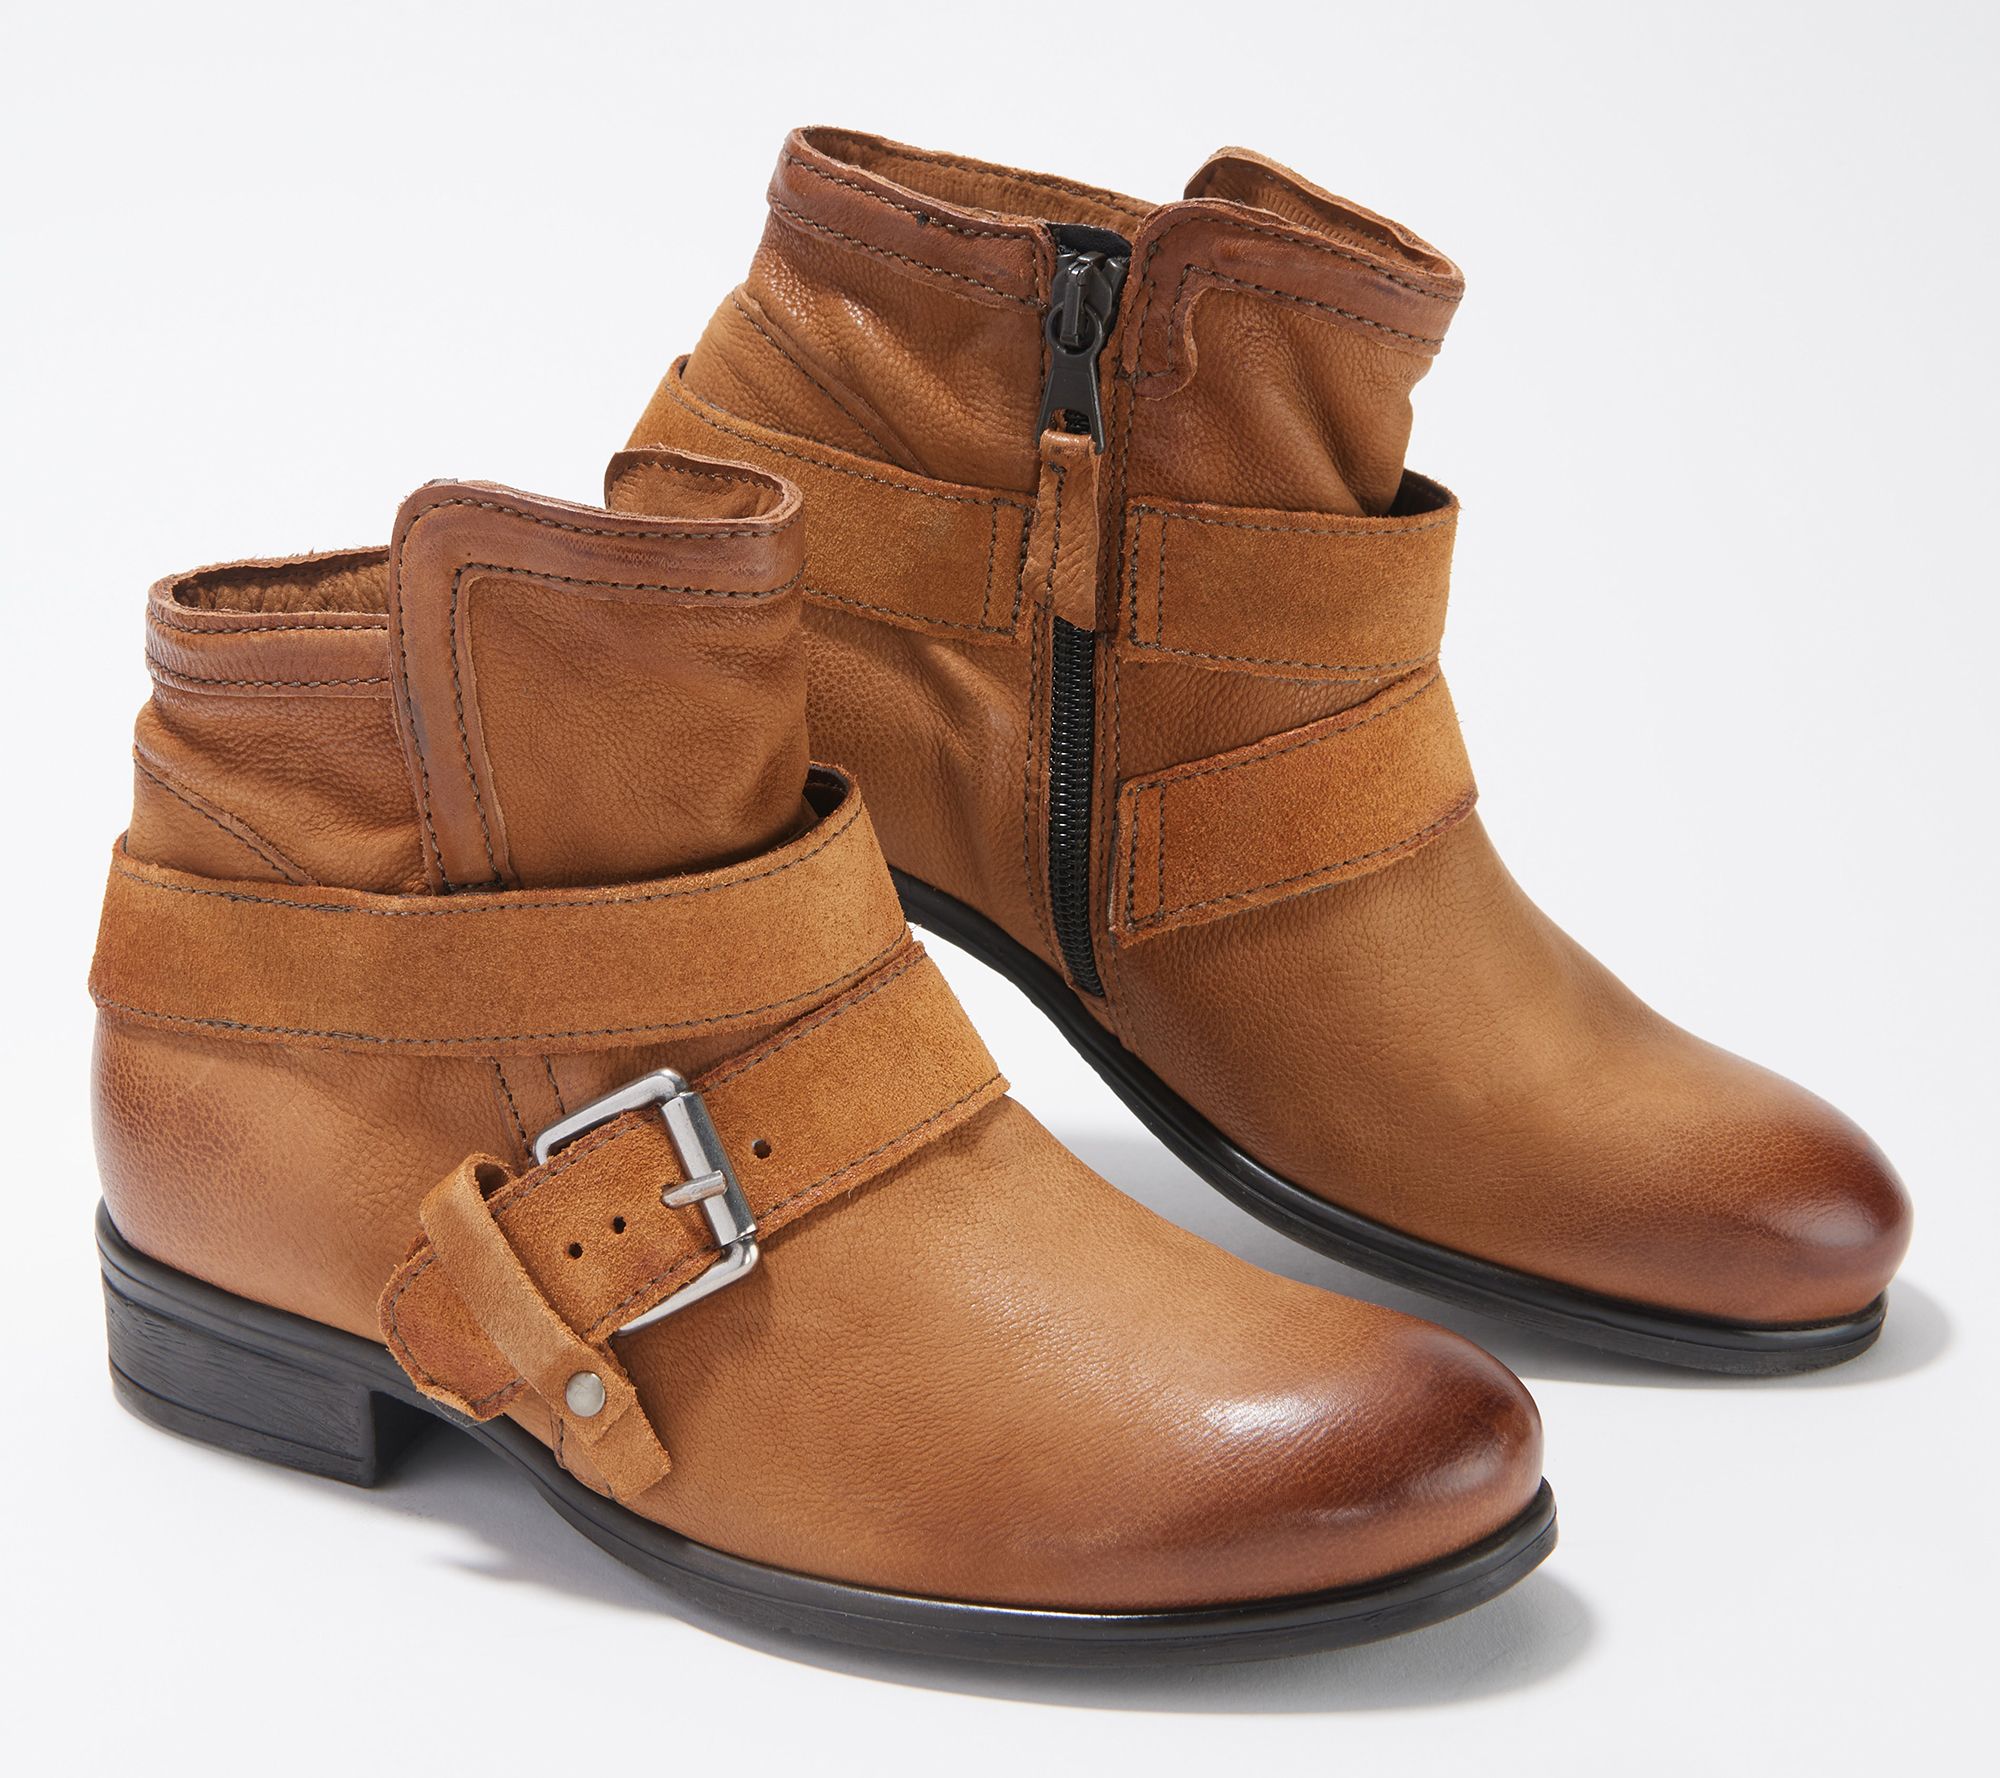 wide width ugg style boots